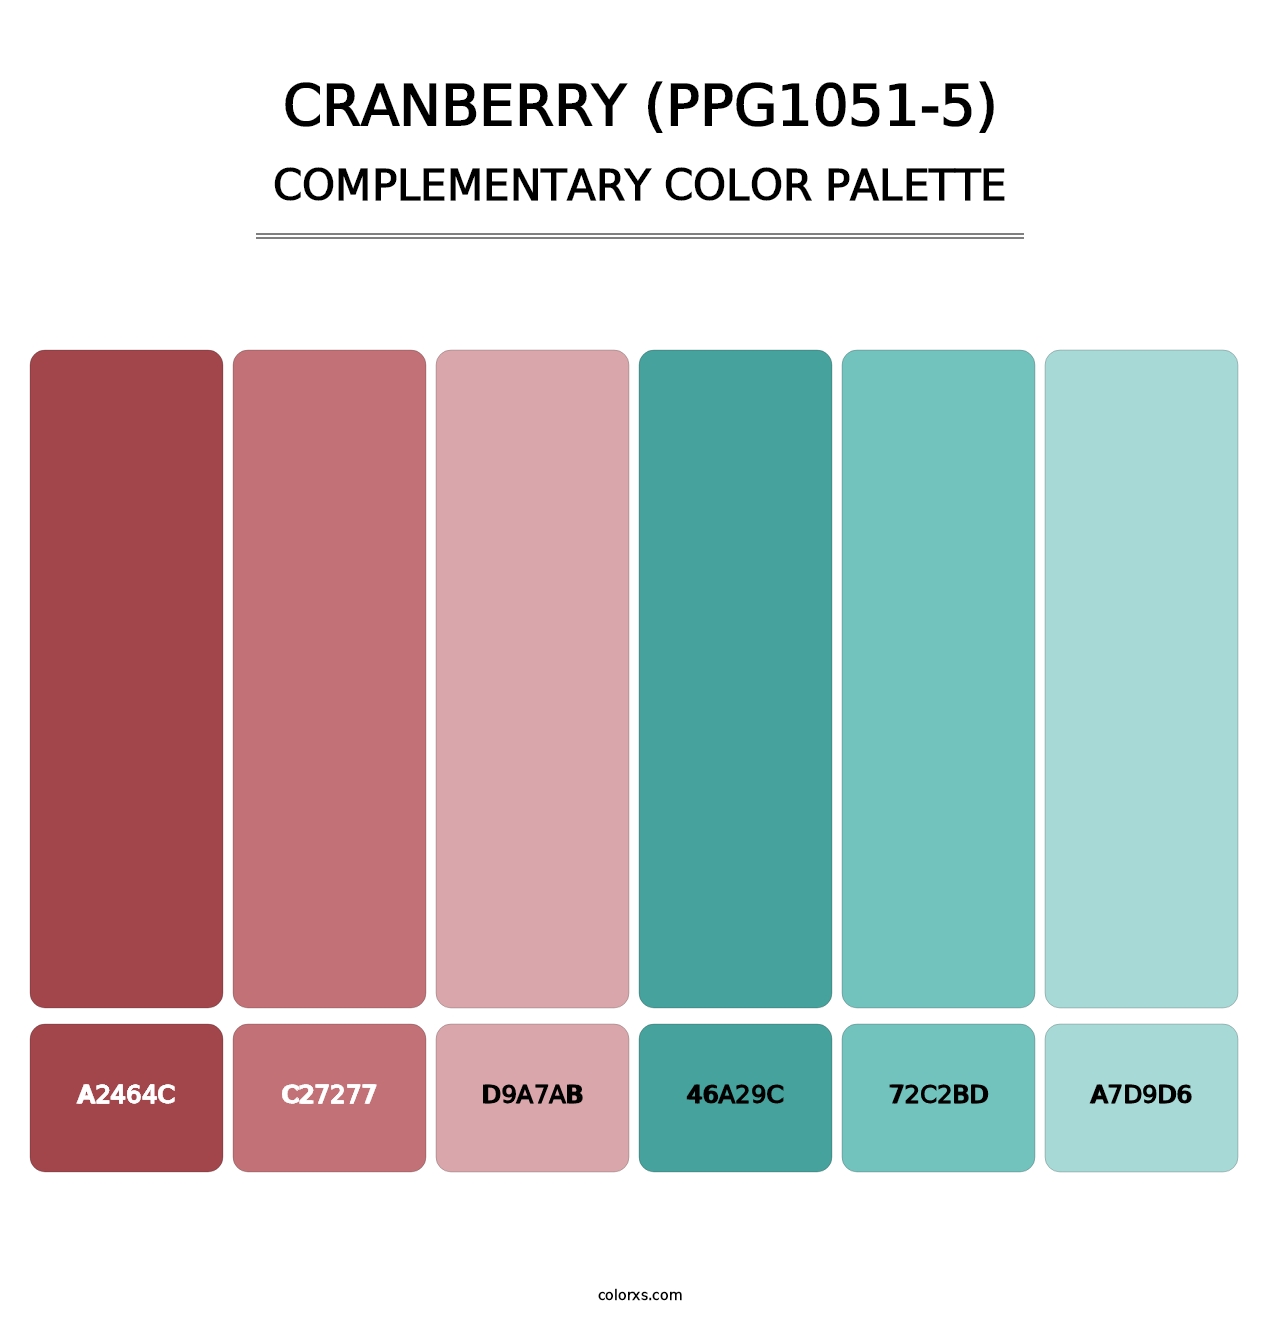 Cranberry (PPG1051-5) - Complementary Color Palette